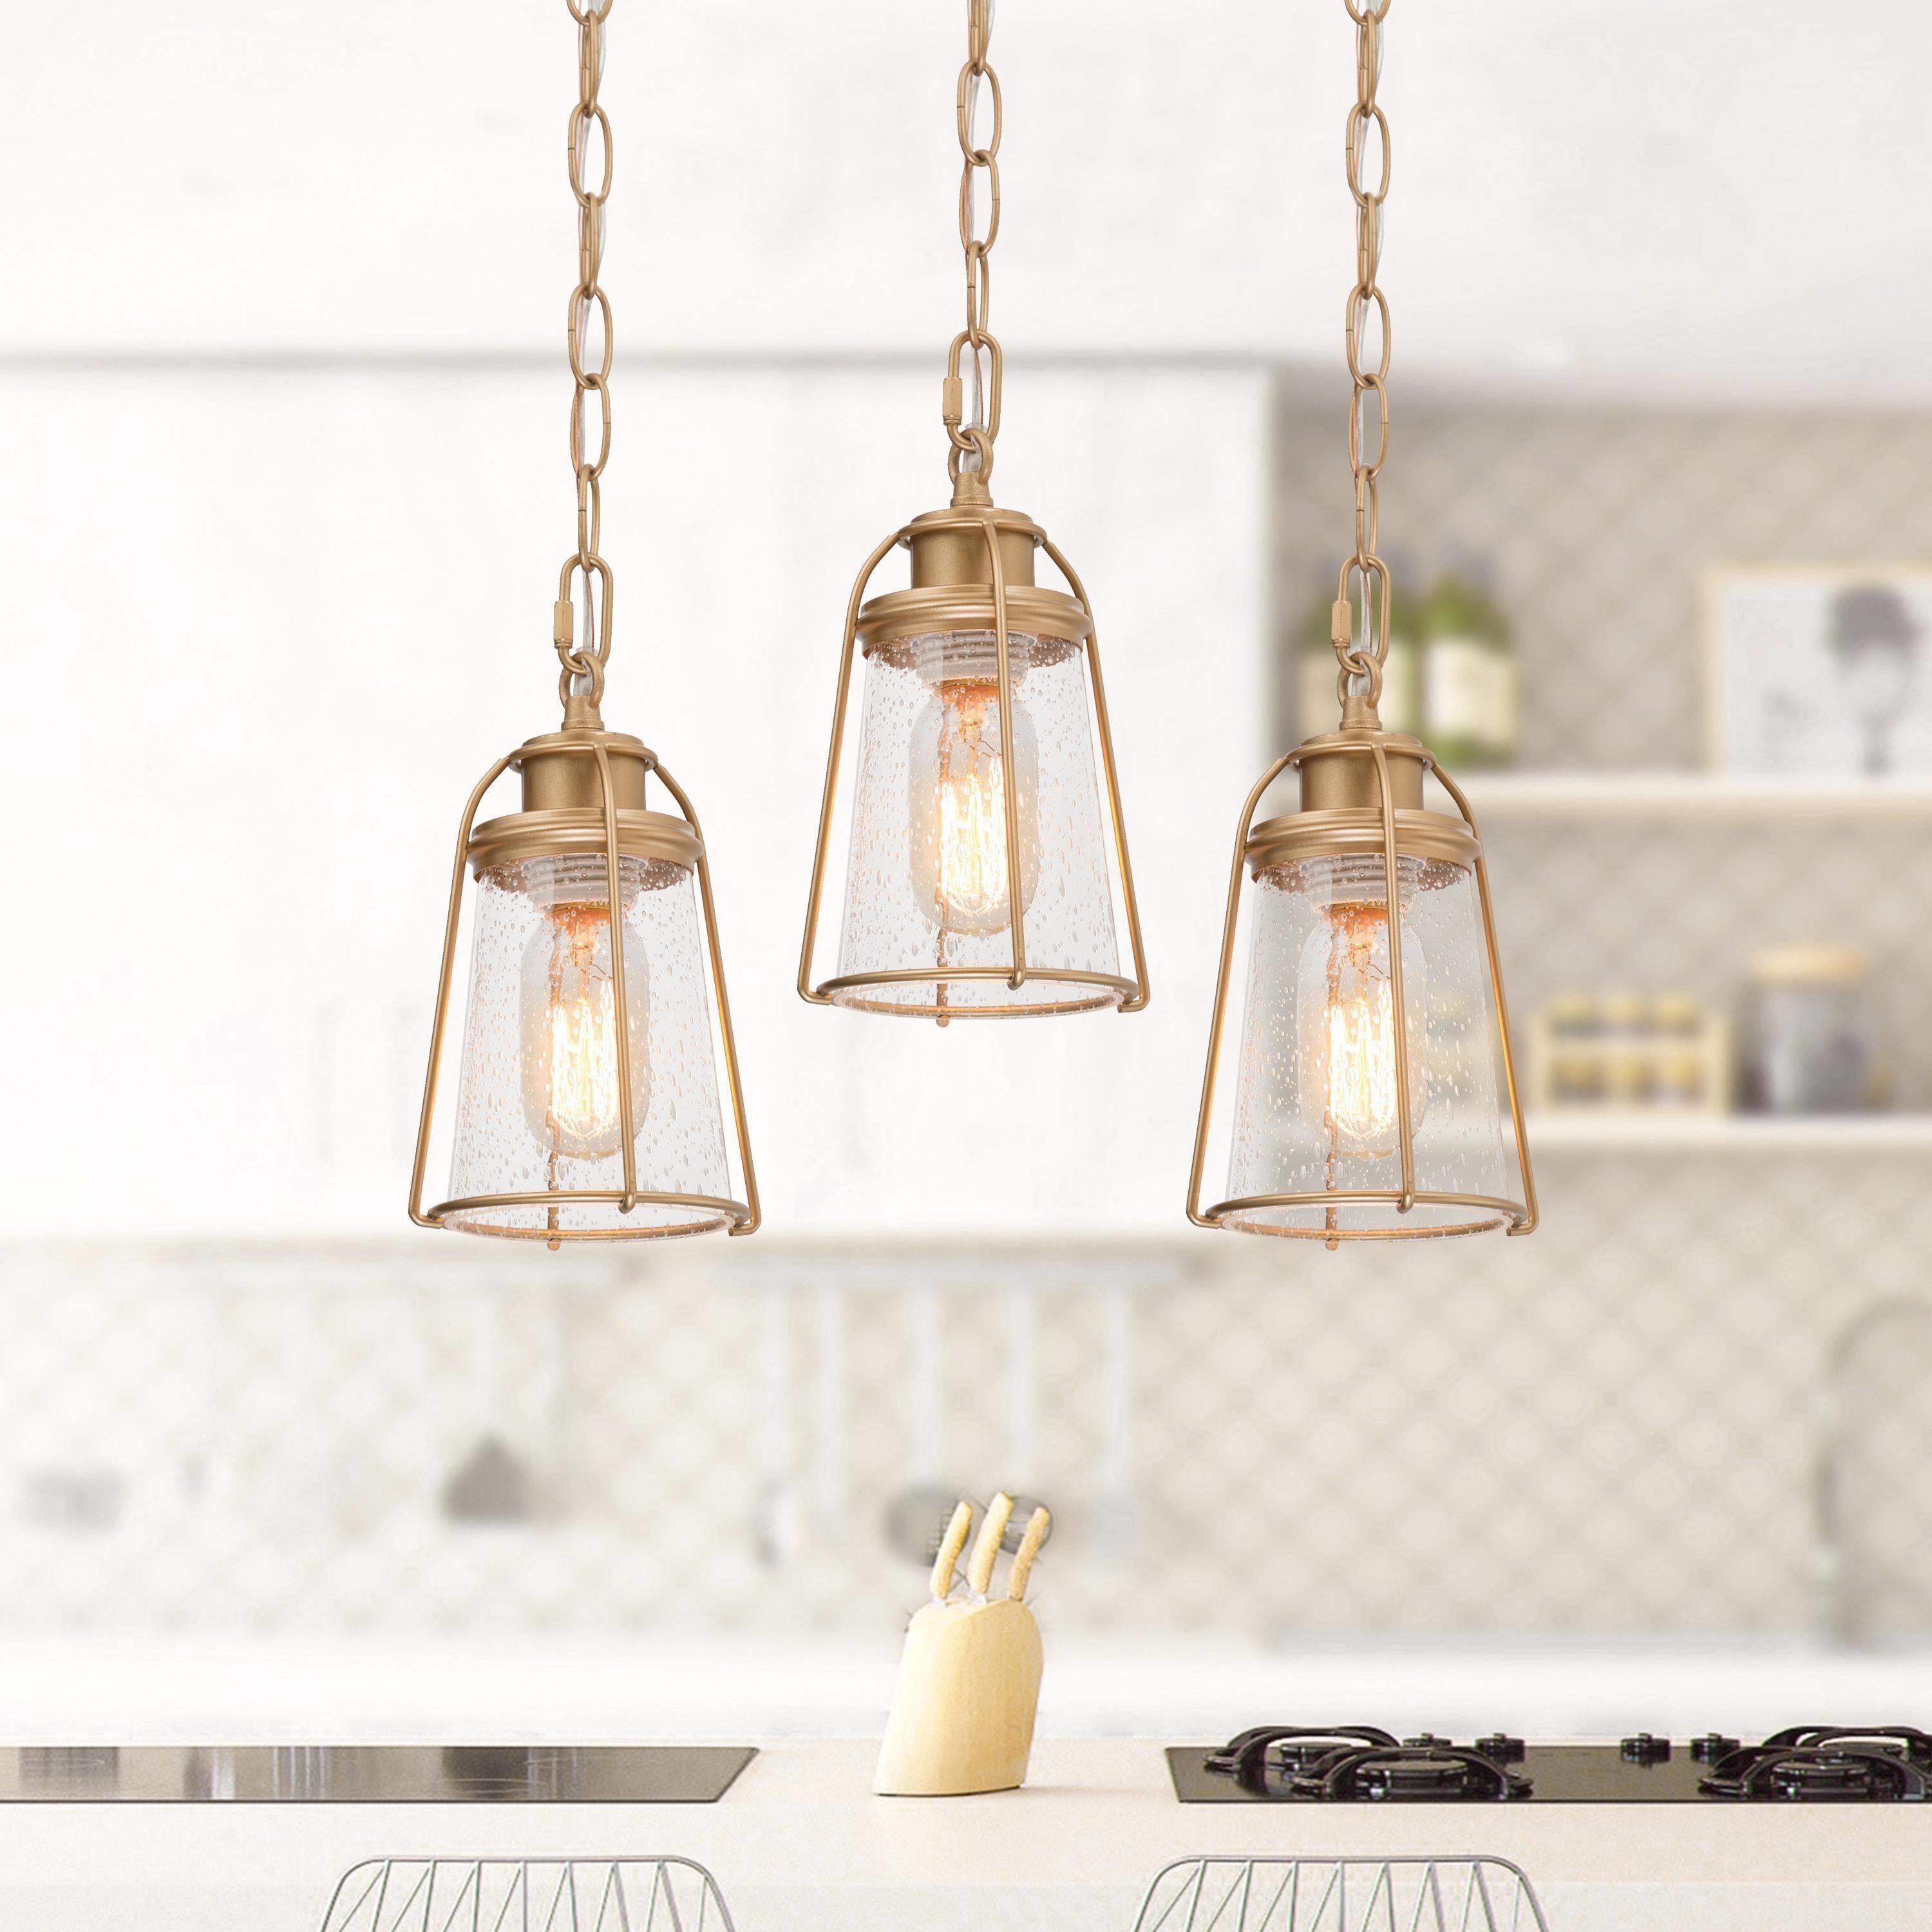 Seeded Gold Kitchen Pendant at the in Glass Glass Seeded Modern/Contemporary Lantern LED Lighting Island Light Matte department and Shade Hanging Uolfin Mini